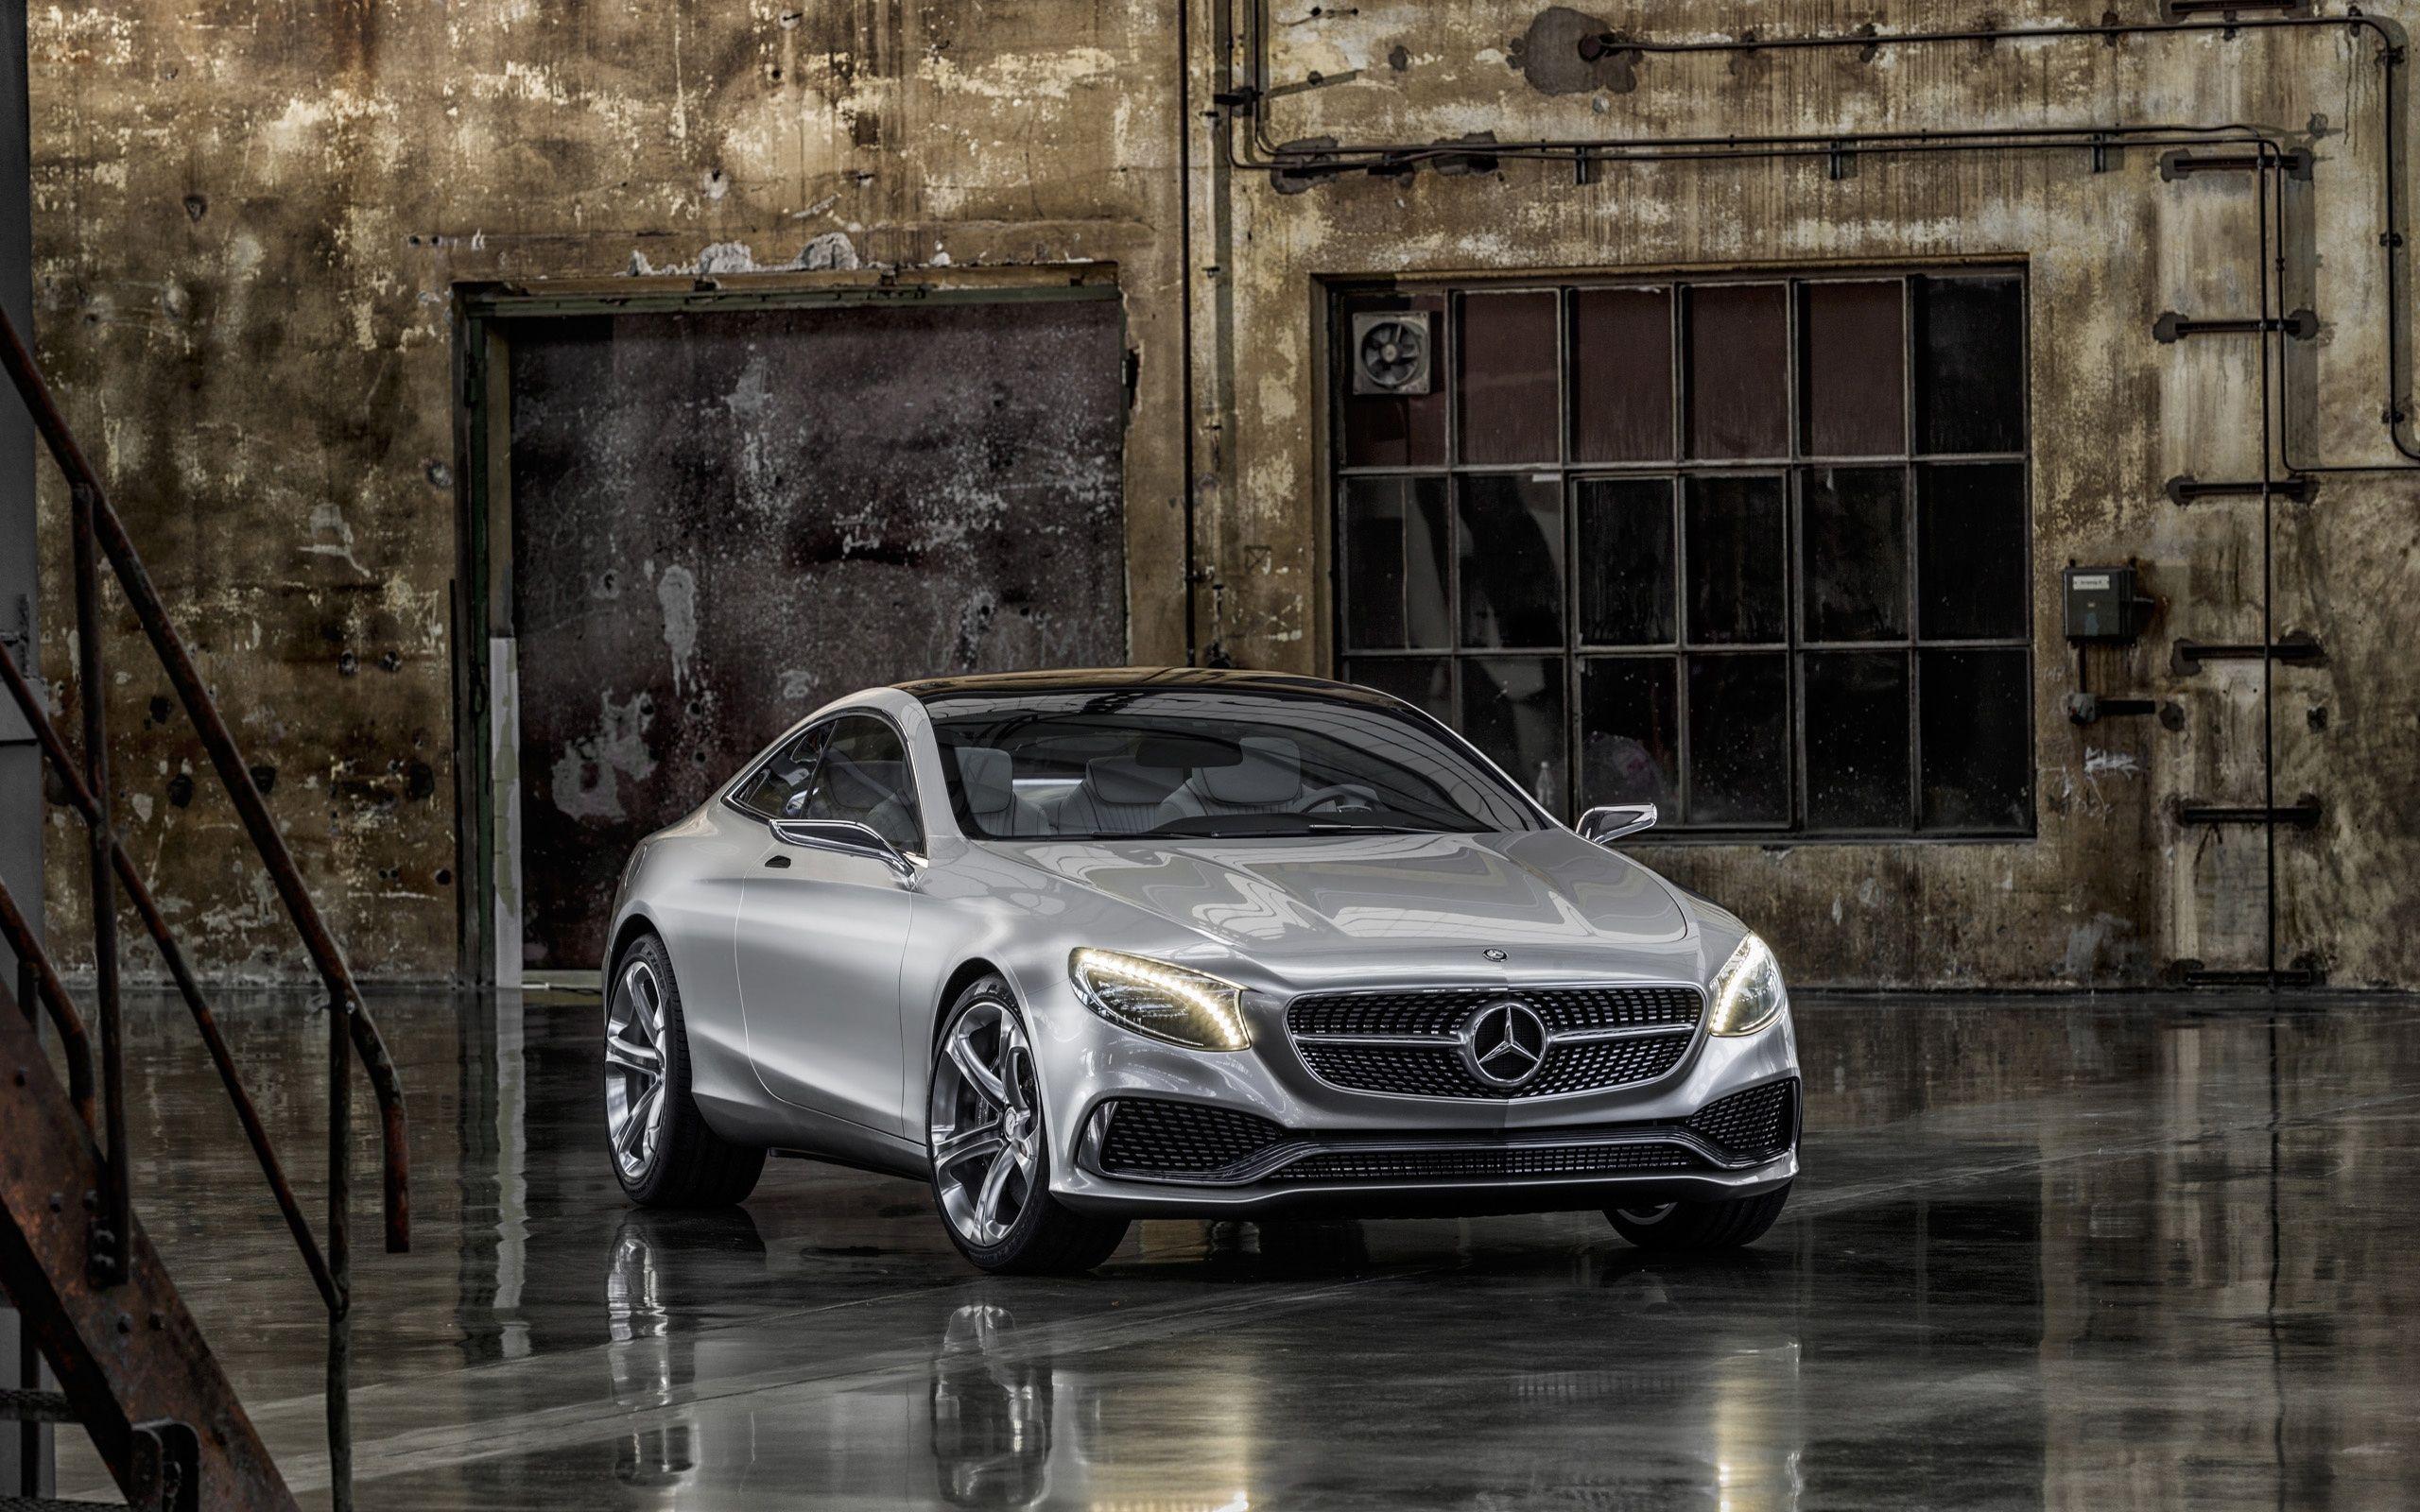 Mercedes Benz S Class Coupe 2013 Wallpaper in jpg format for free